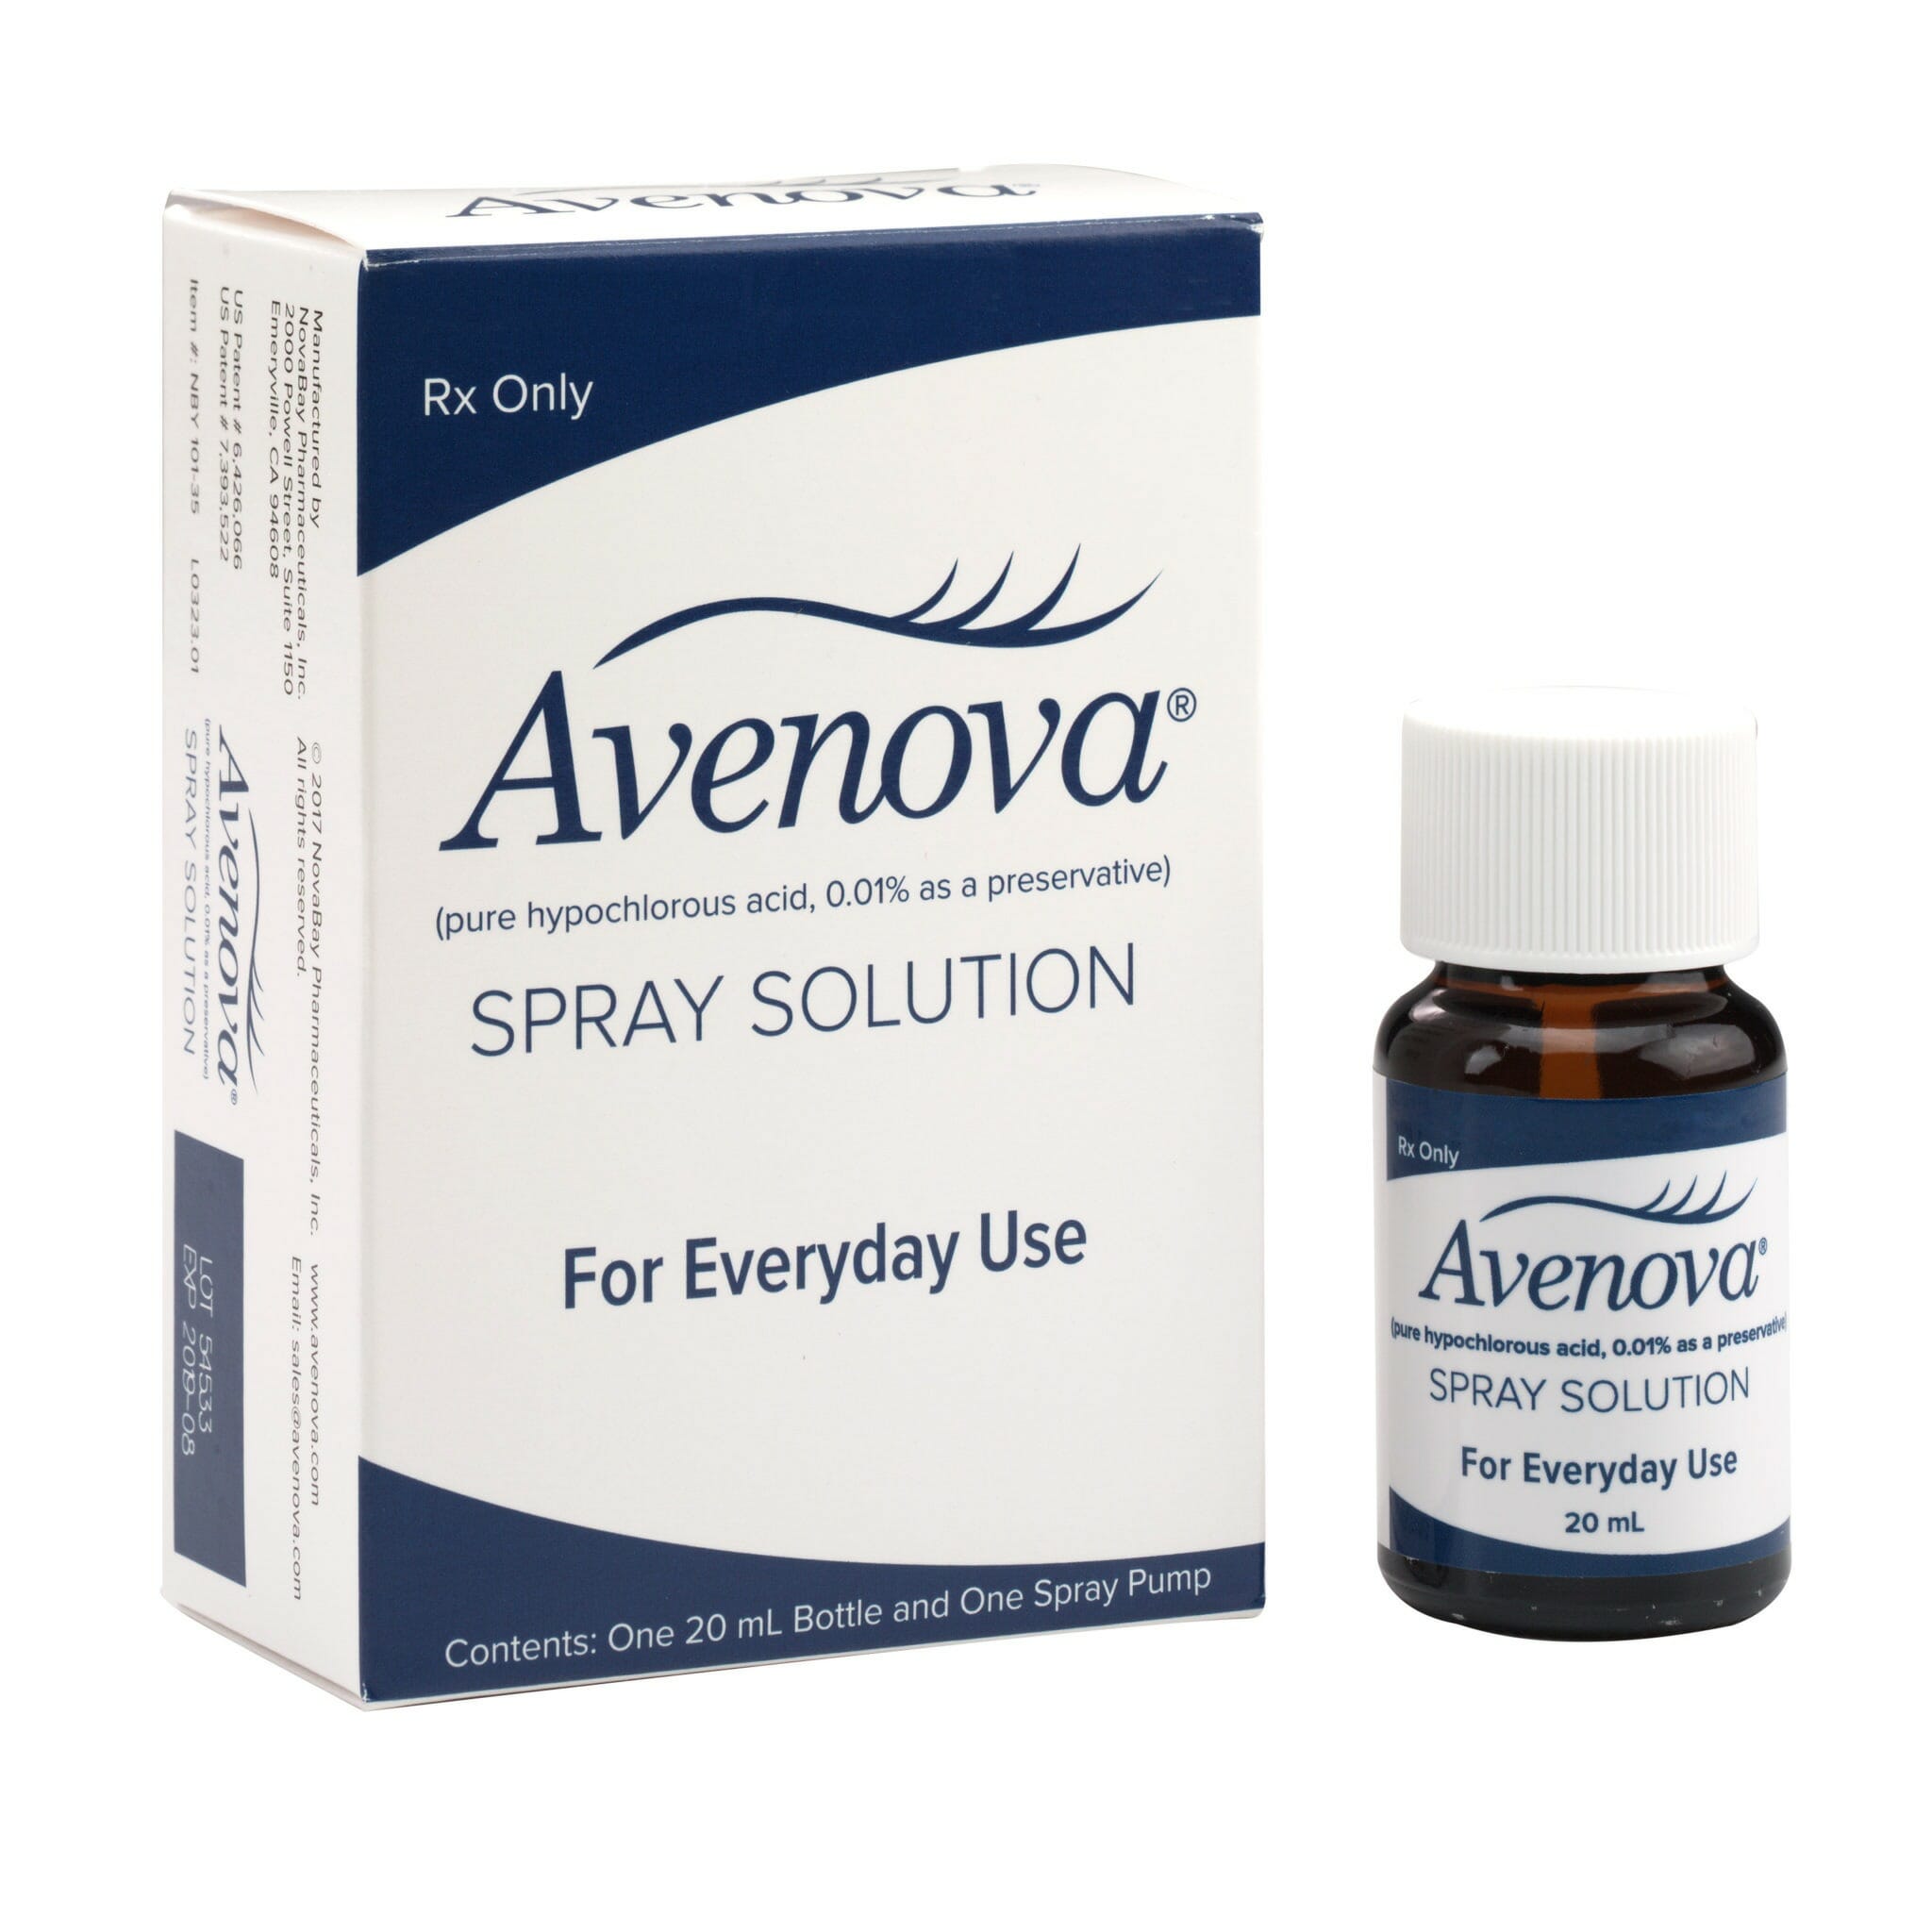 What's the overall rating of the Avenova cleanser I'm considering purchasing?